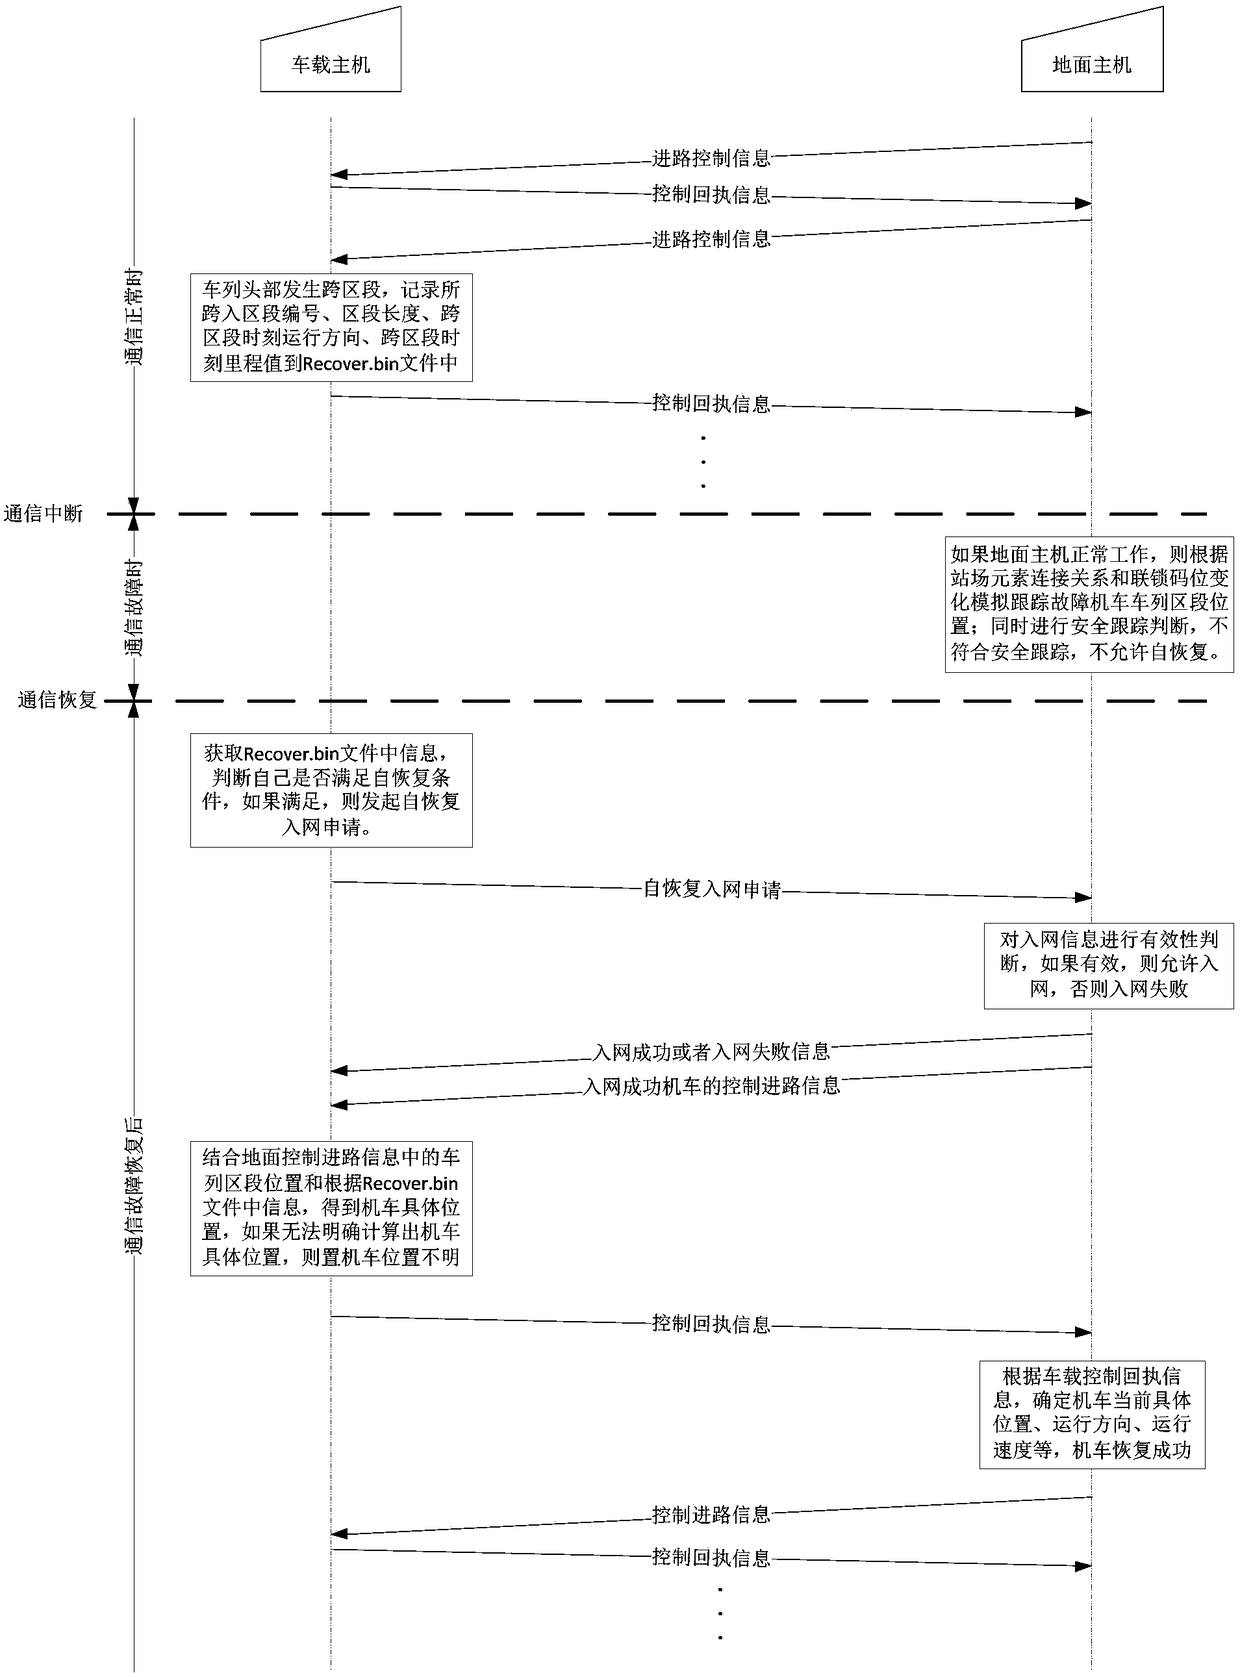 Simulation tracking self-recovery method for communication failure locomotives in locomotive dispatching monitoring system